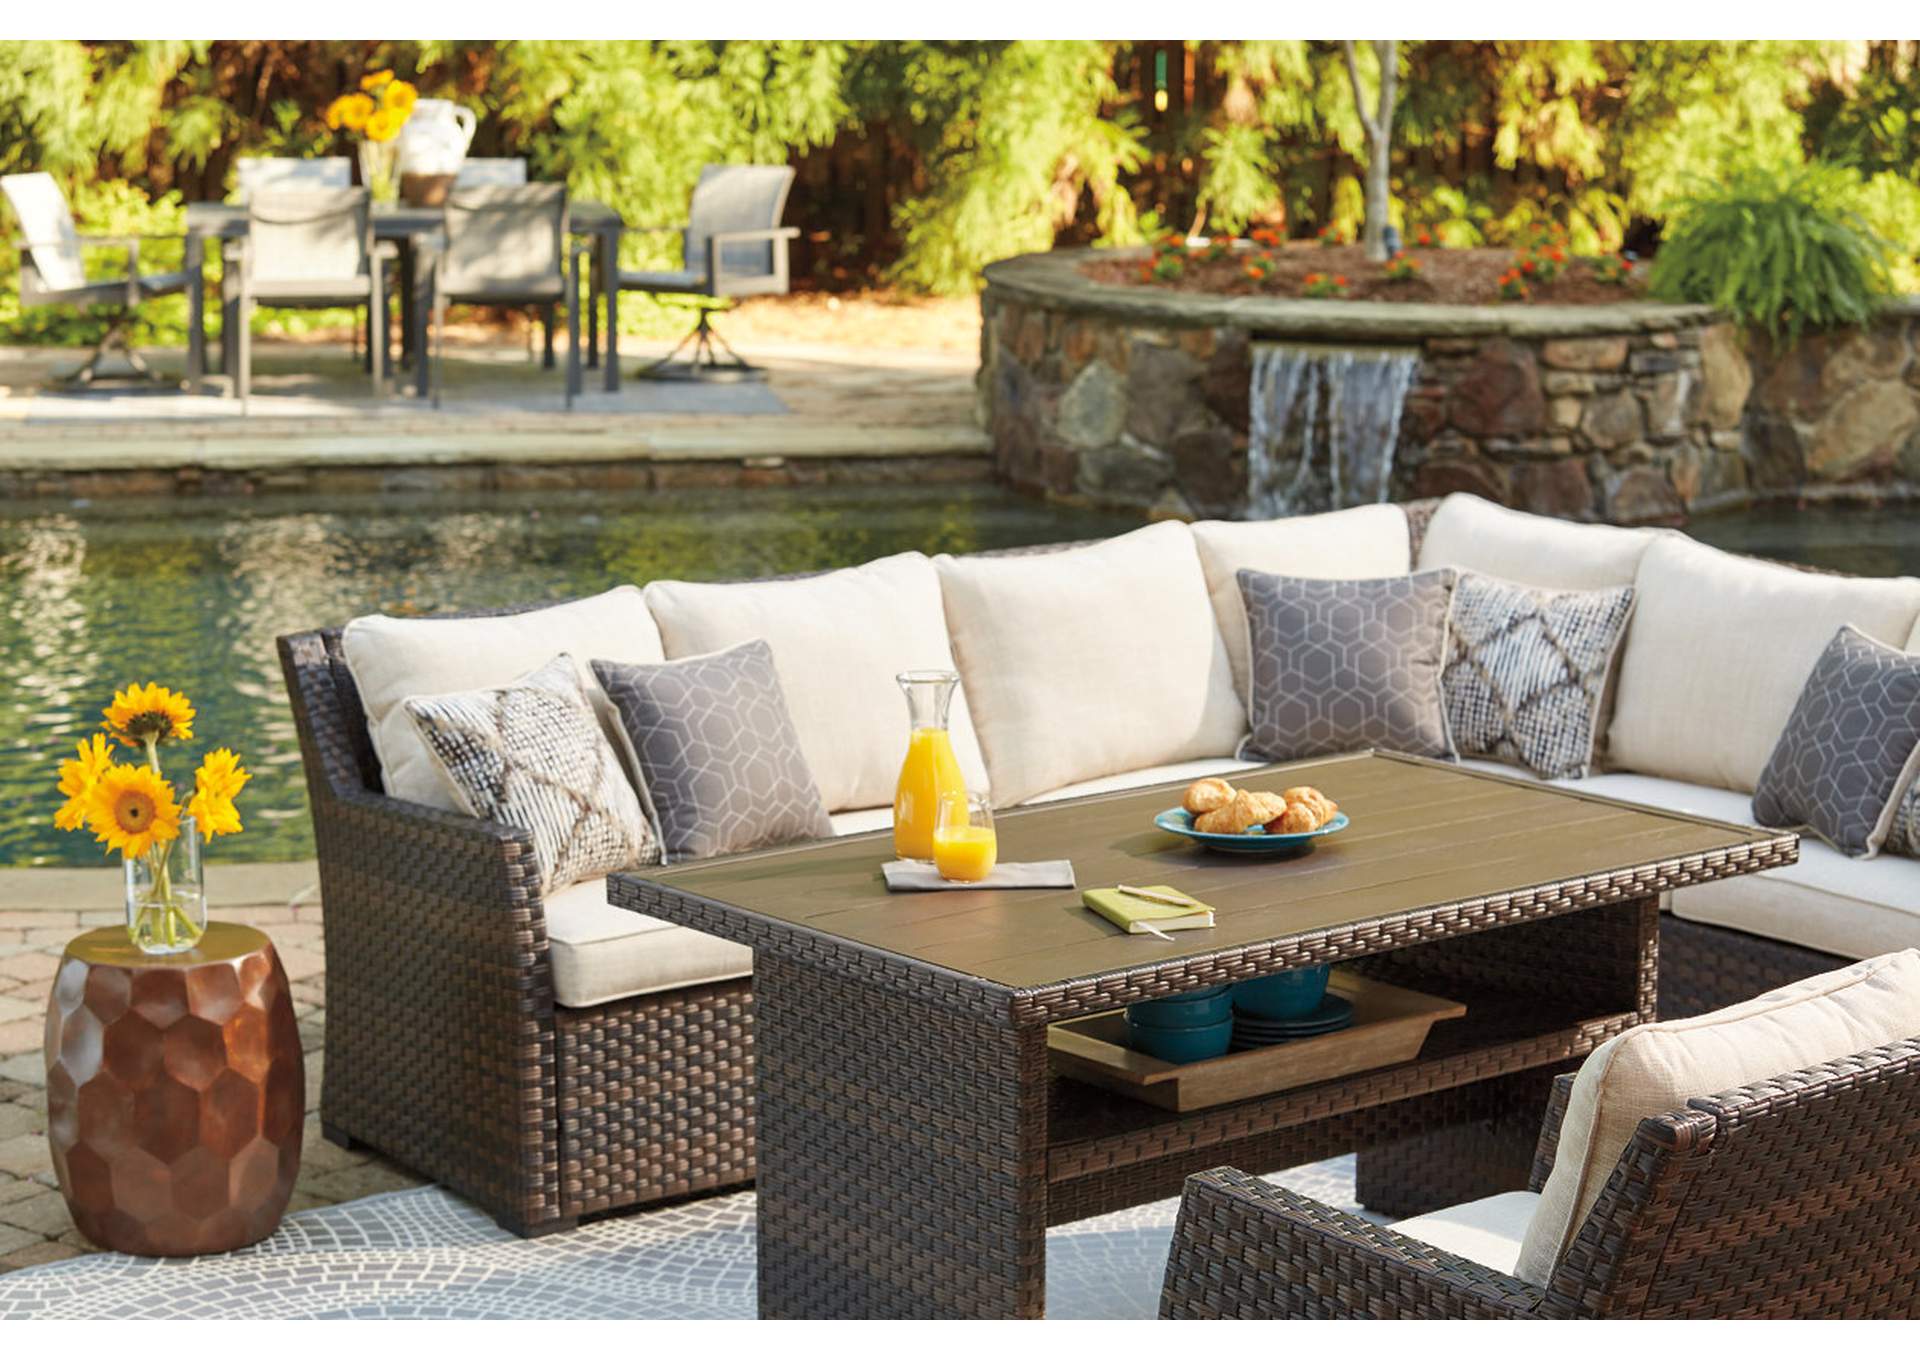 Easy Isle 3-Piece Sofa Sectional/Chair with Cushion,Outdoor By Ashley